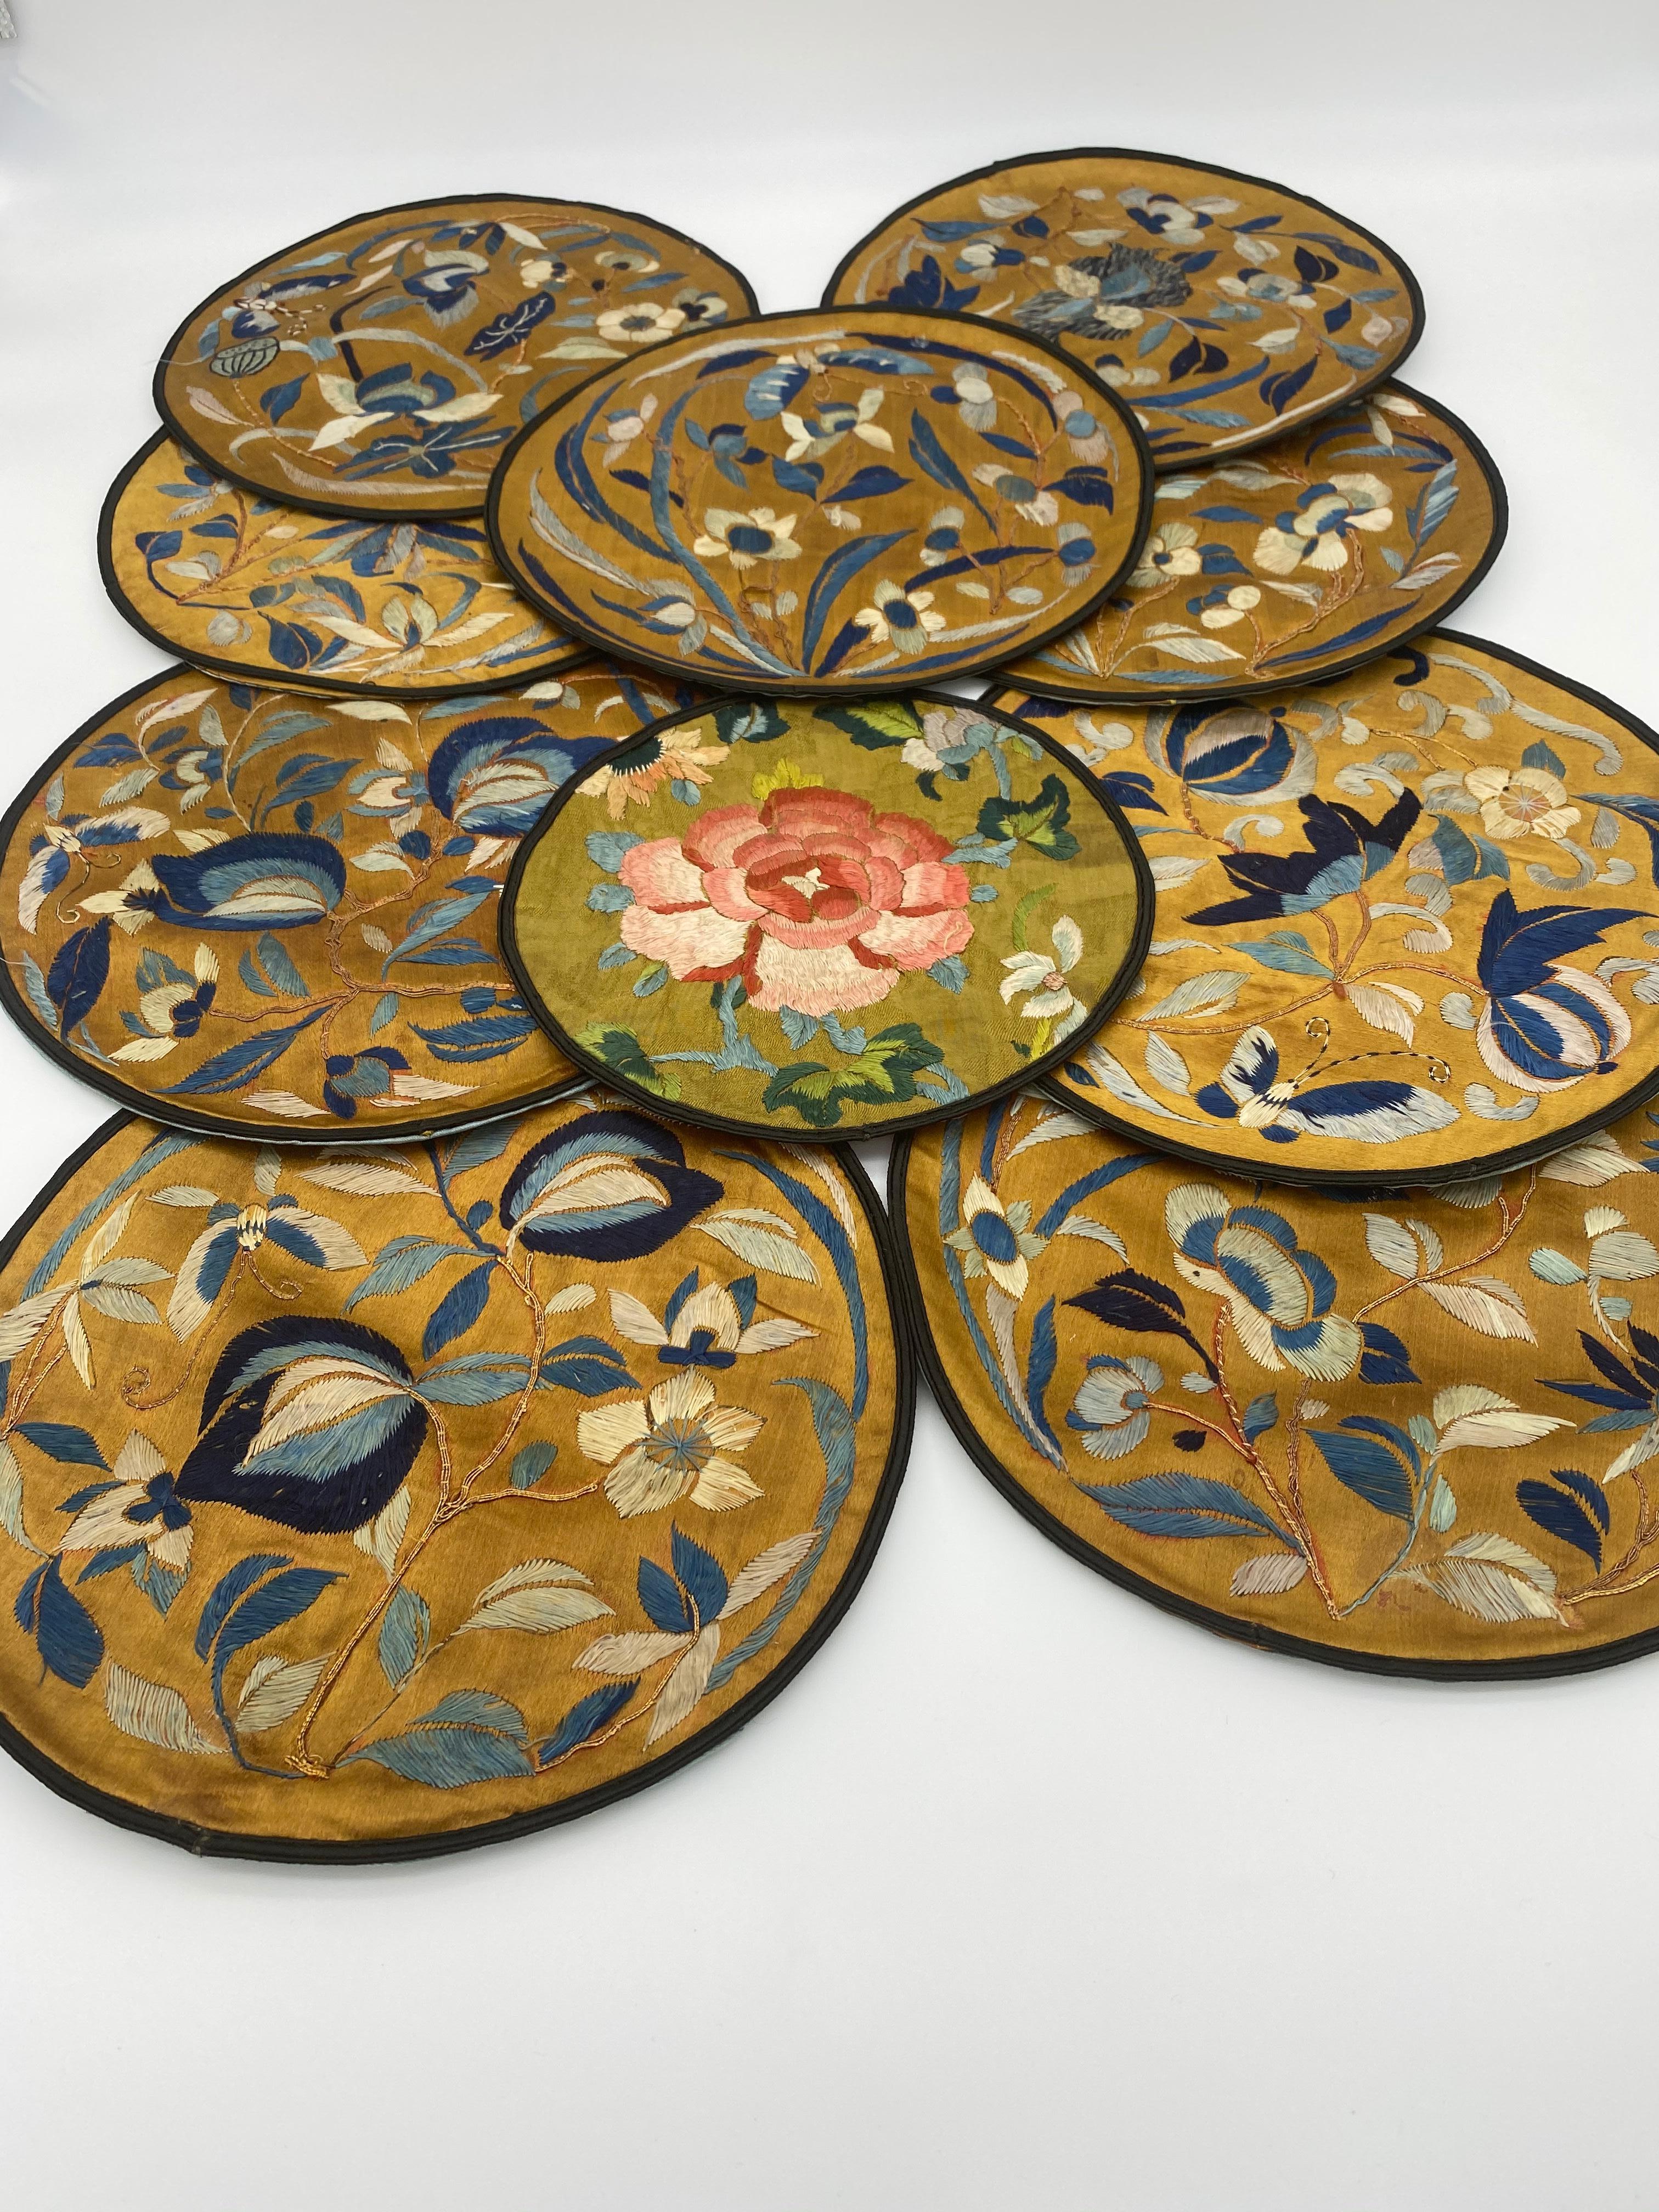 10 antique Qing Dynasty Chinese embroidered silk roundels embroidery robe. Decorated all-over with beautiful blue and red flowers. 9 pieces: 9 in diameter. 1 piece: 7 in diameter.